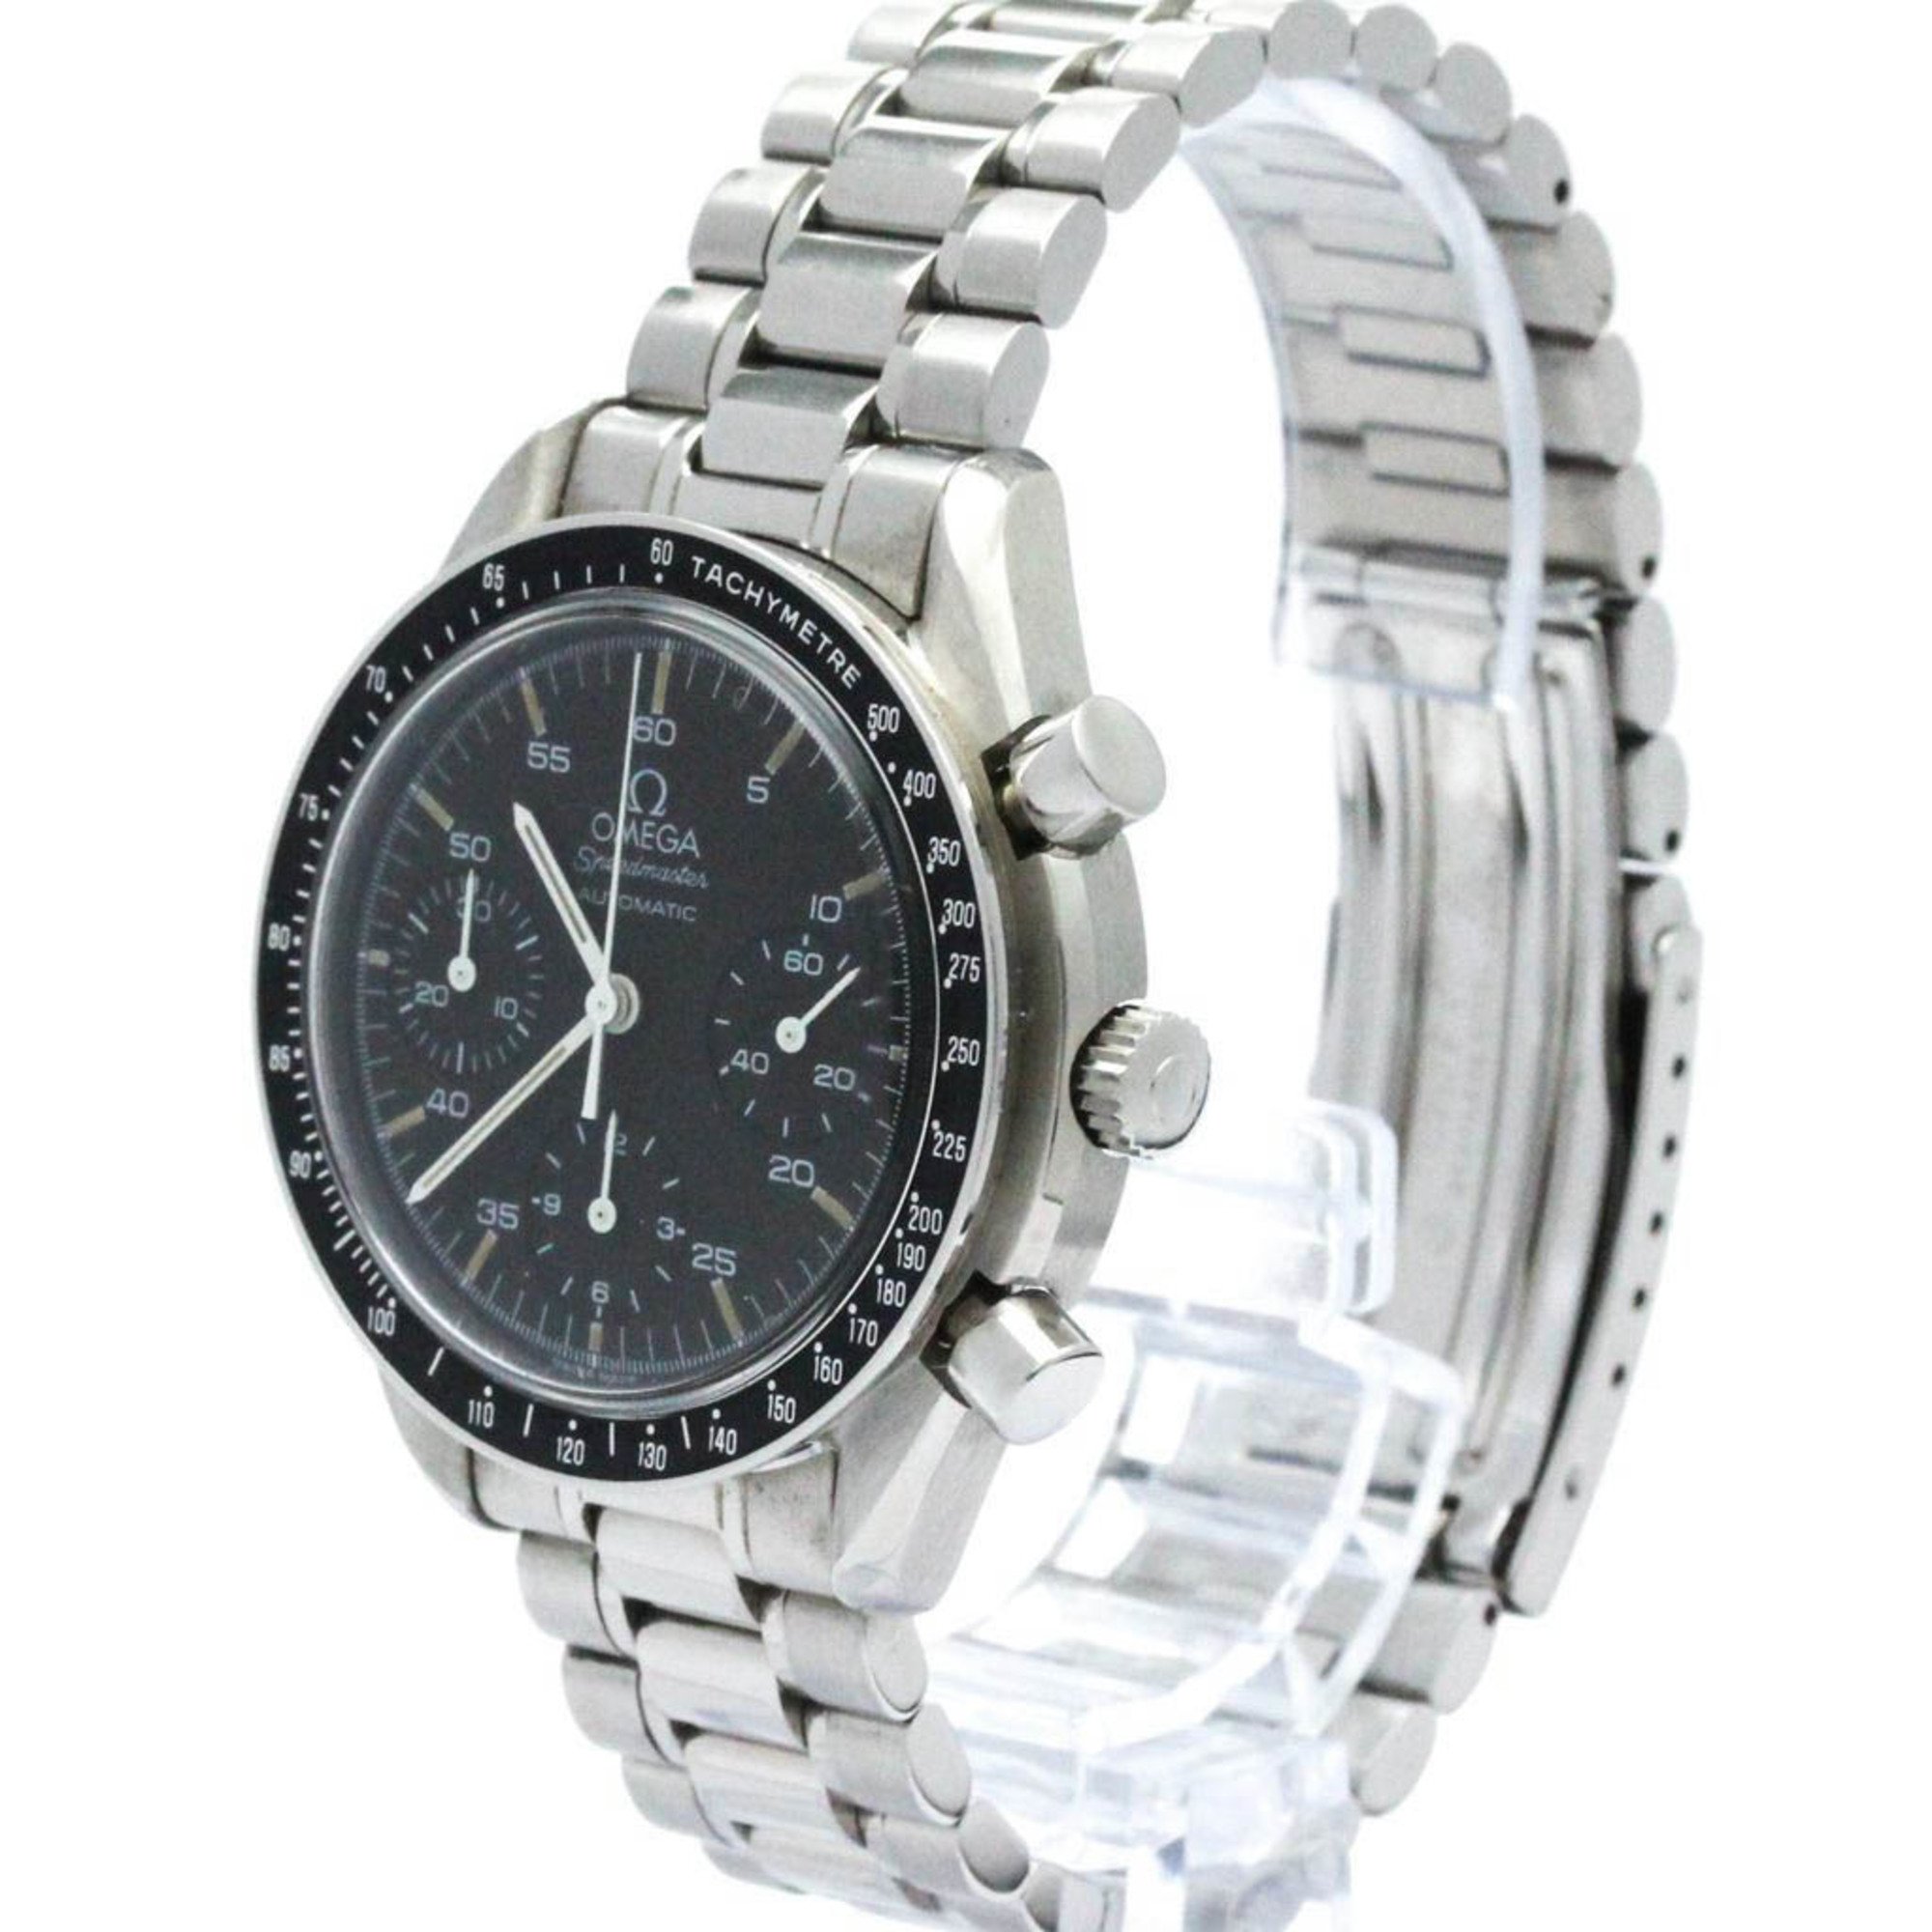 Polished OMEGA Speedmaster Automatic Steel Mens Watch 3510.50 BF572184